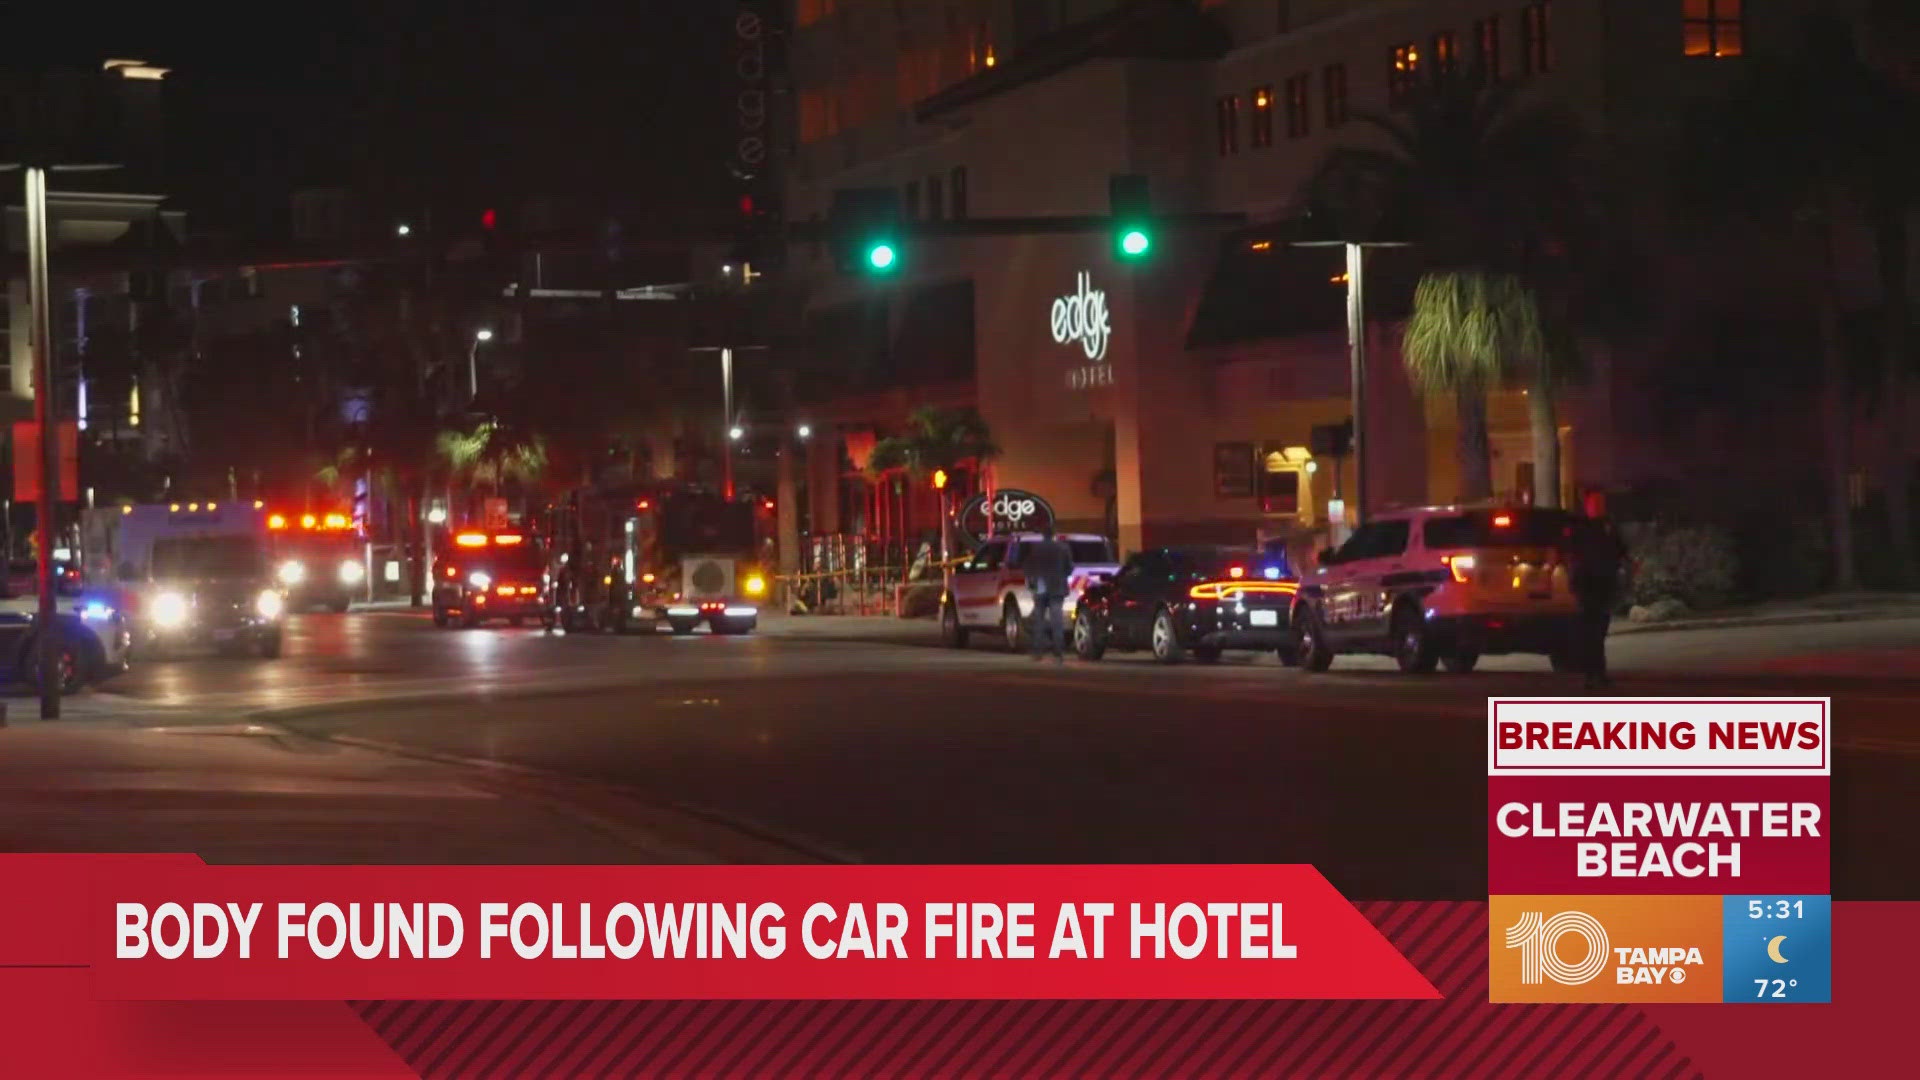 Clearwater police said the car fire happened in the parking garage at the Edge Hotel.